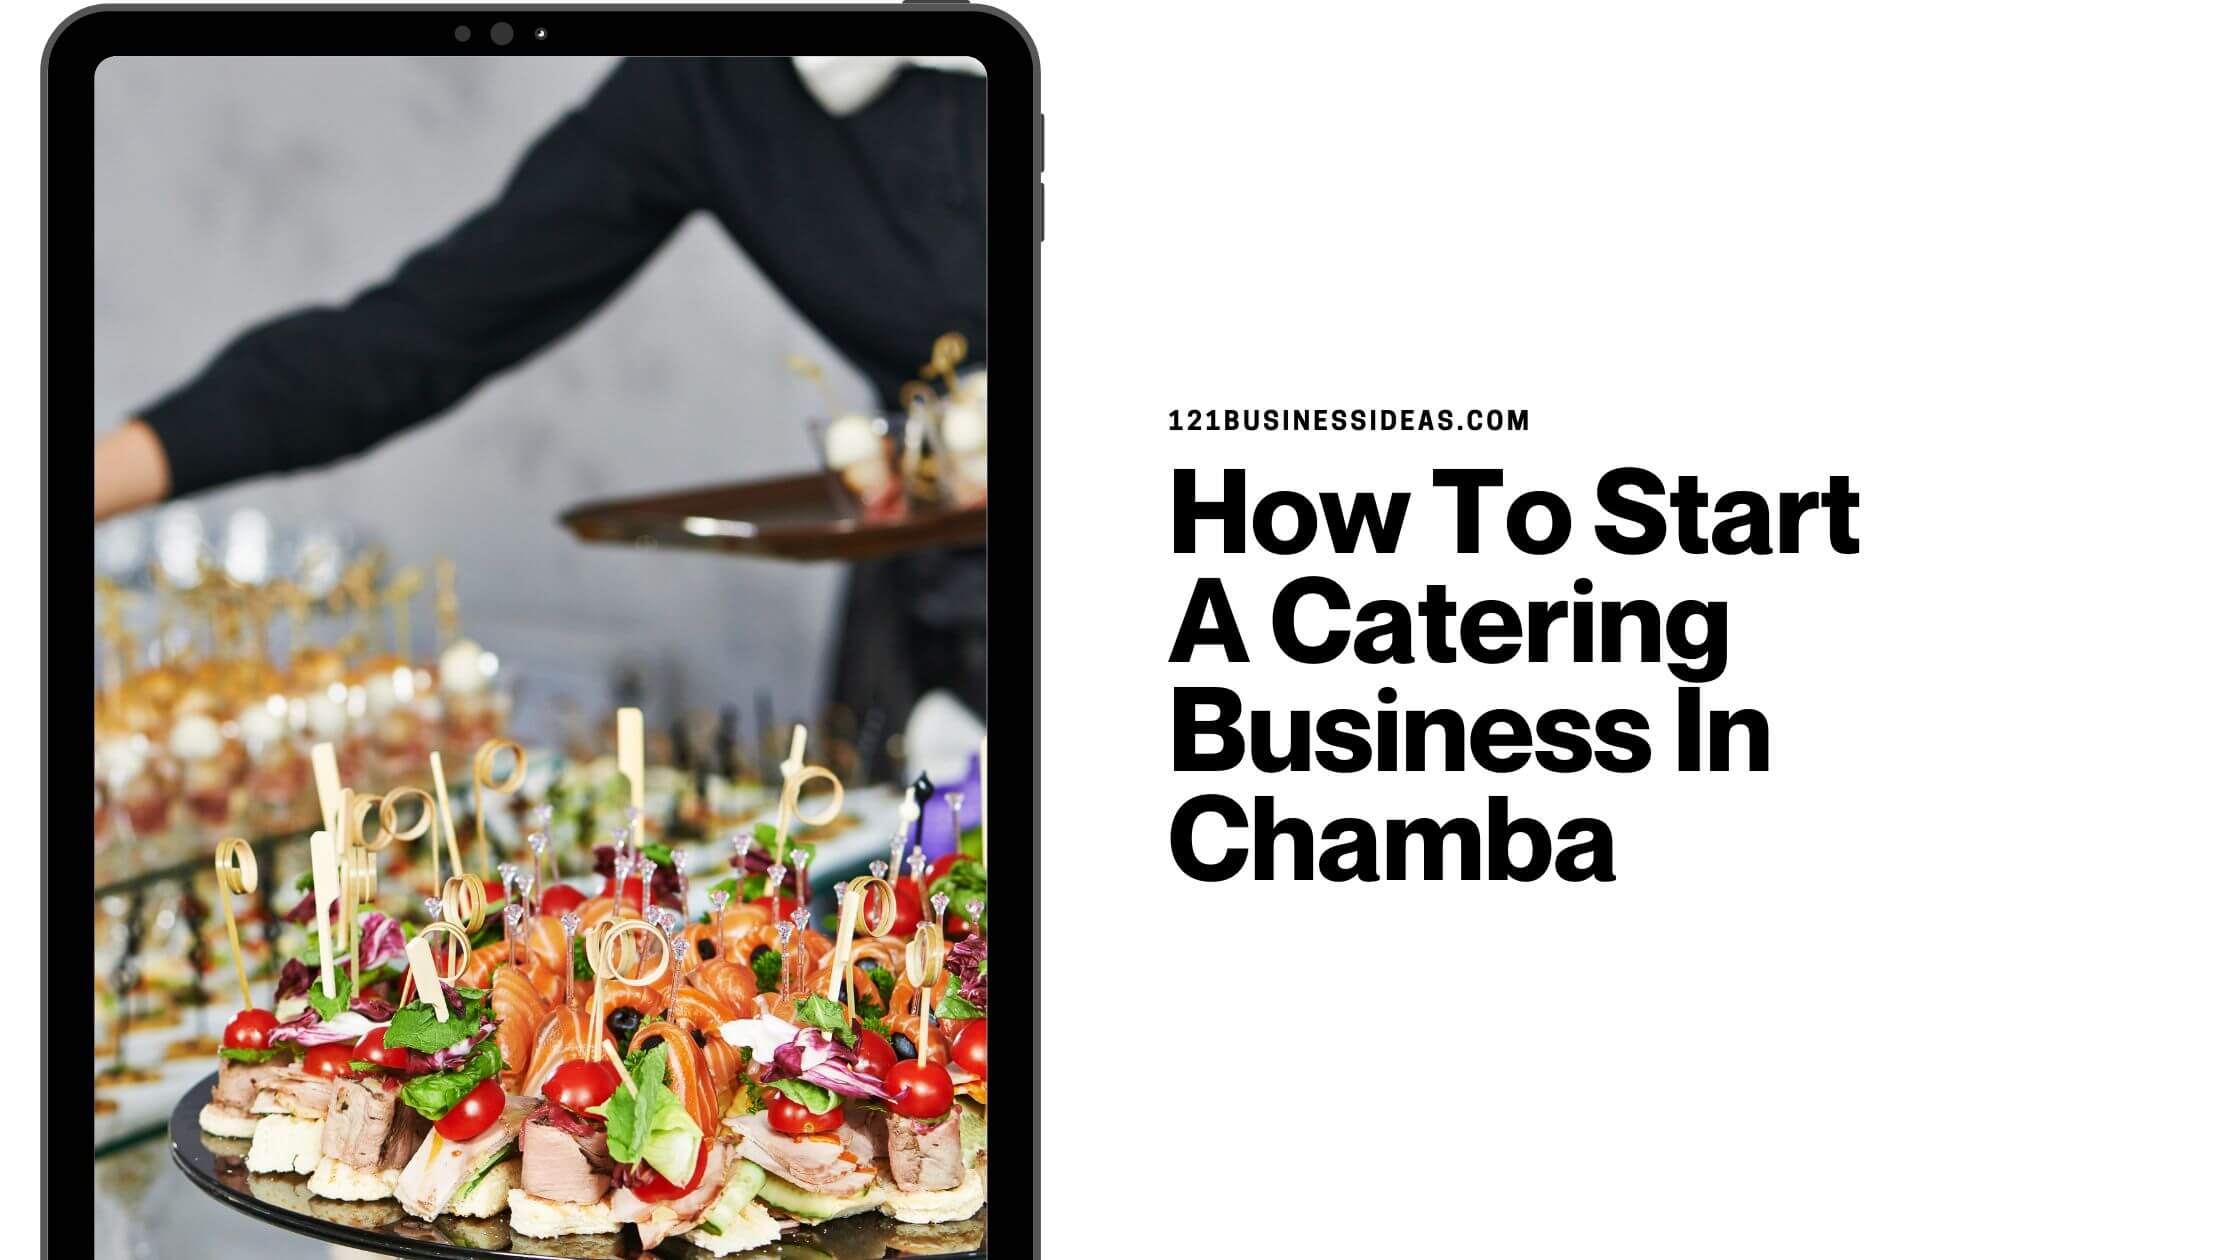 How To Start A Catering Business In Chamba (1) (1)